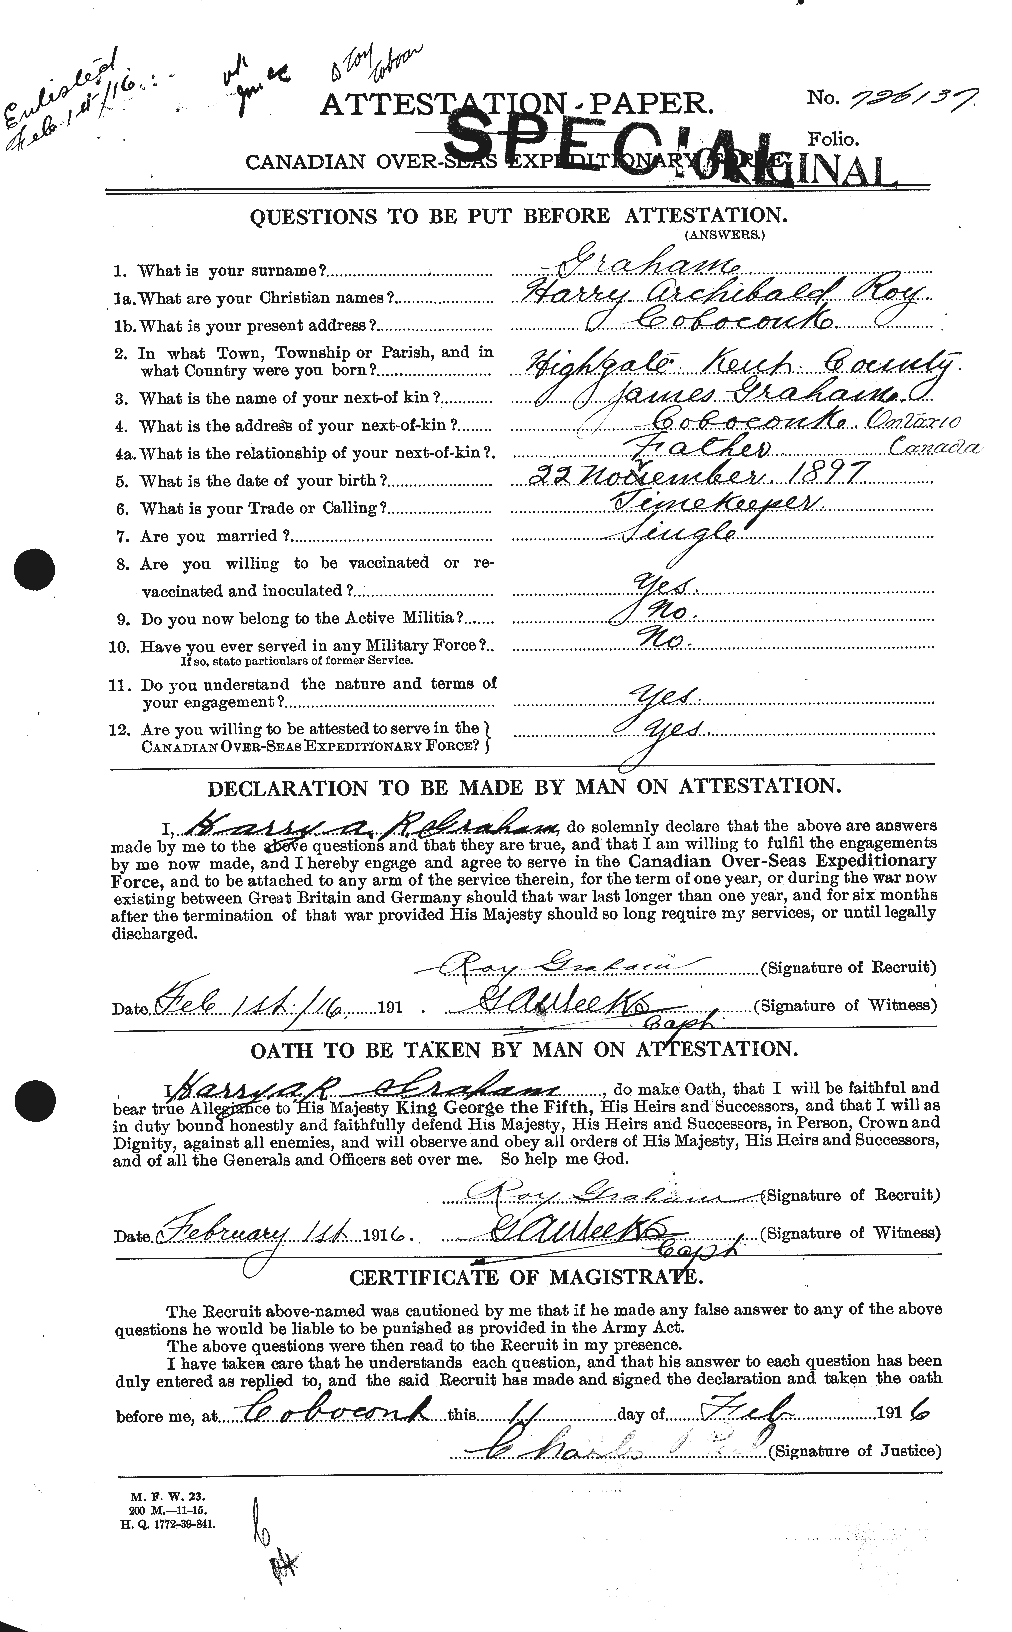 Personnel Records of the First World War - CEF 357719a